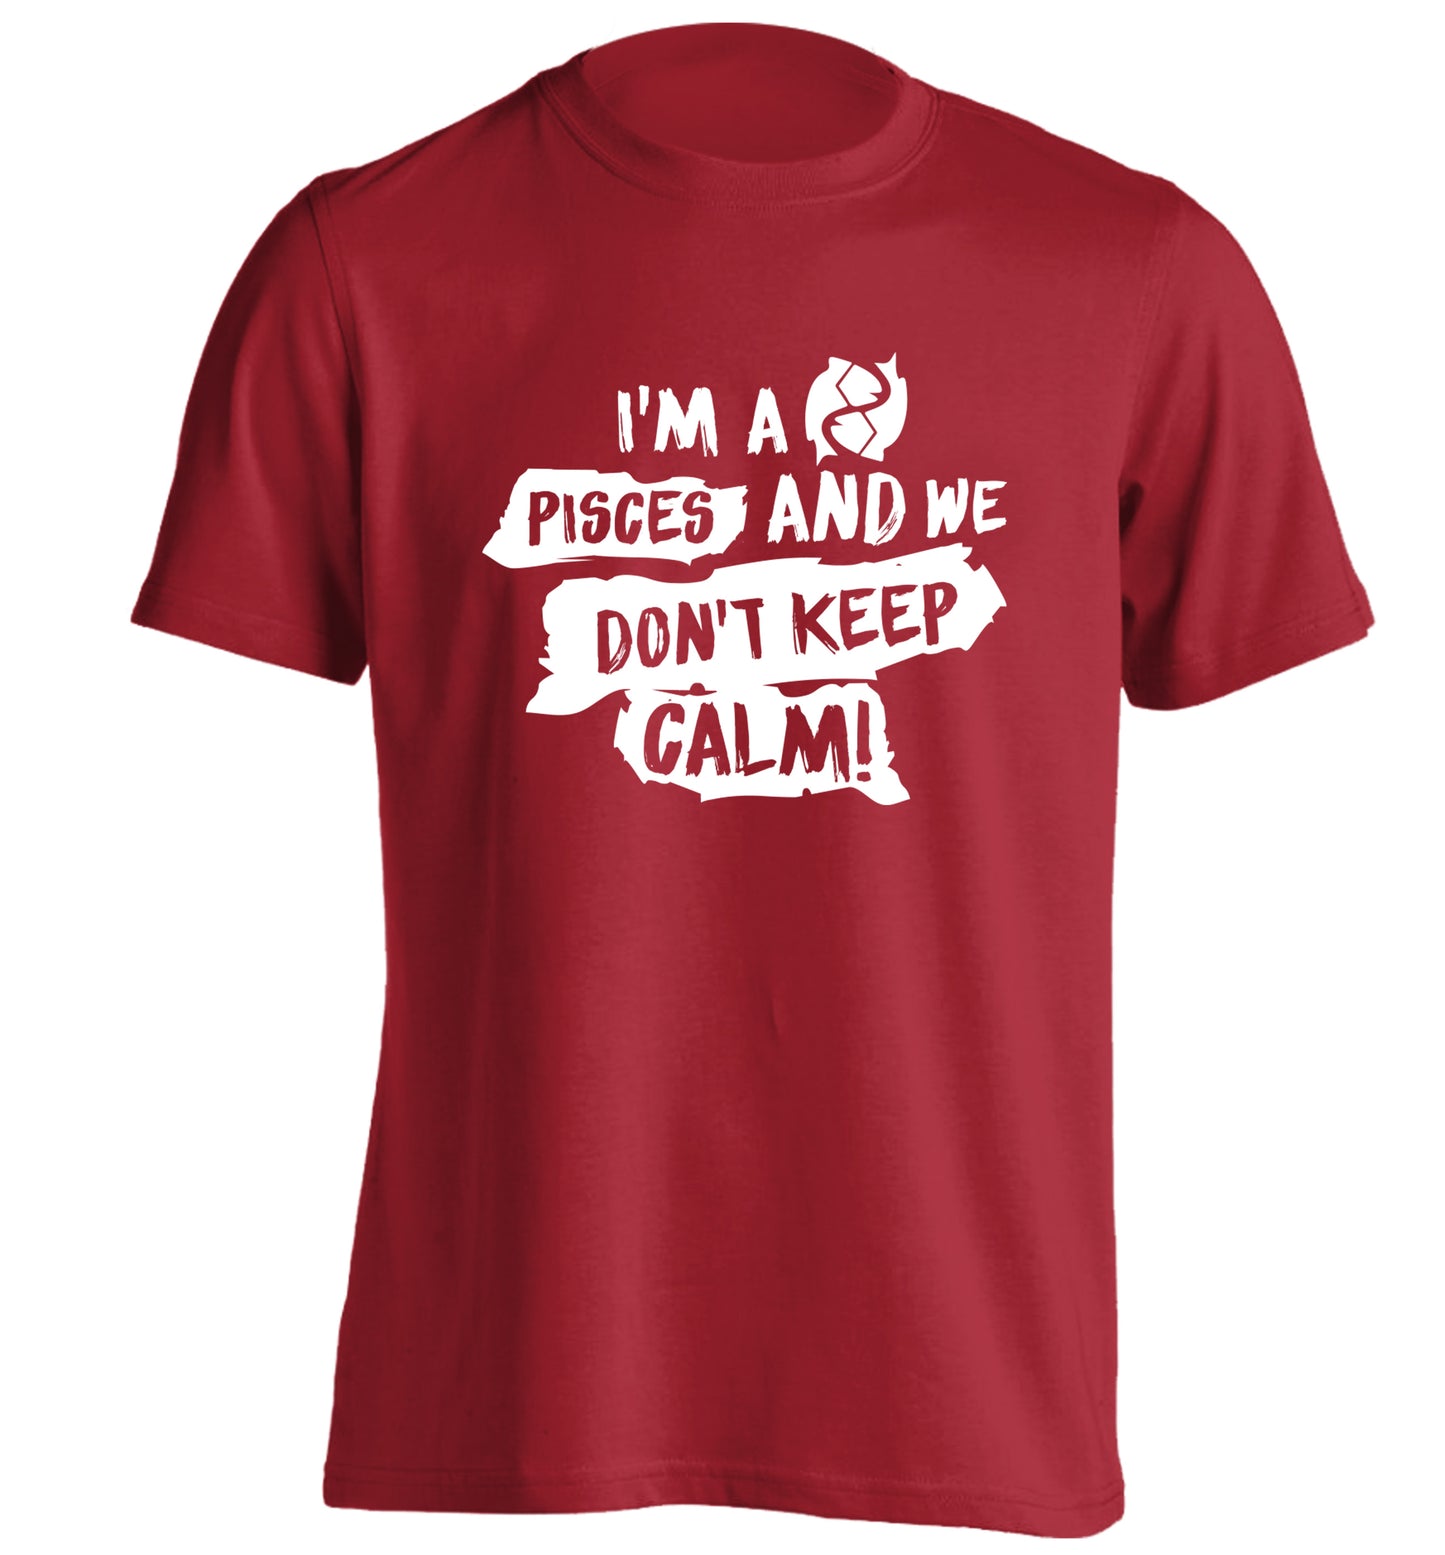 I'm a pisces and we don't keep calm adults unisex red Tshirt 2XL